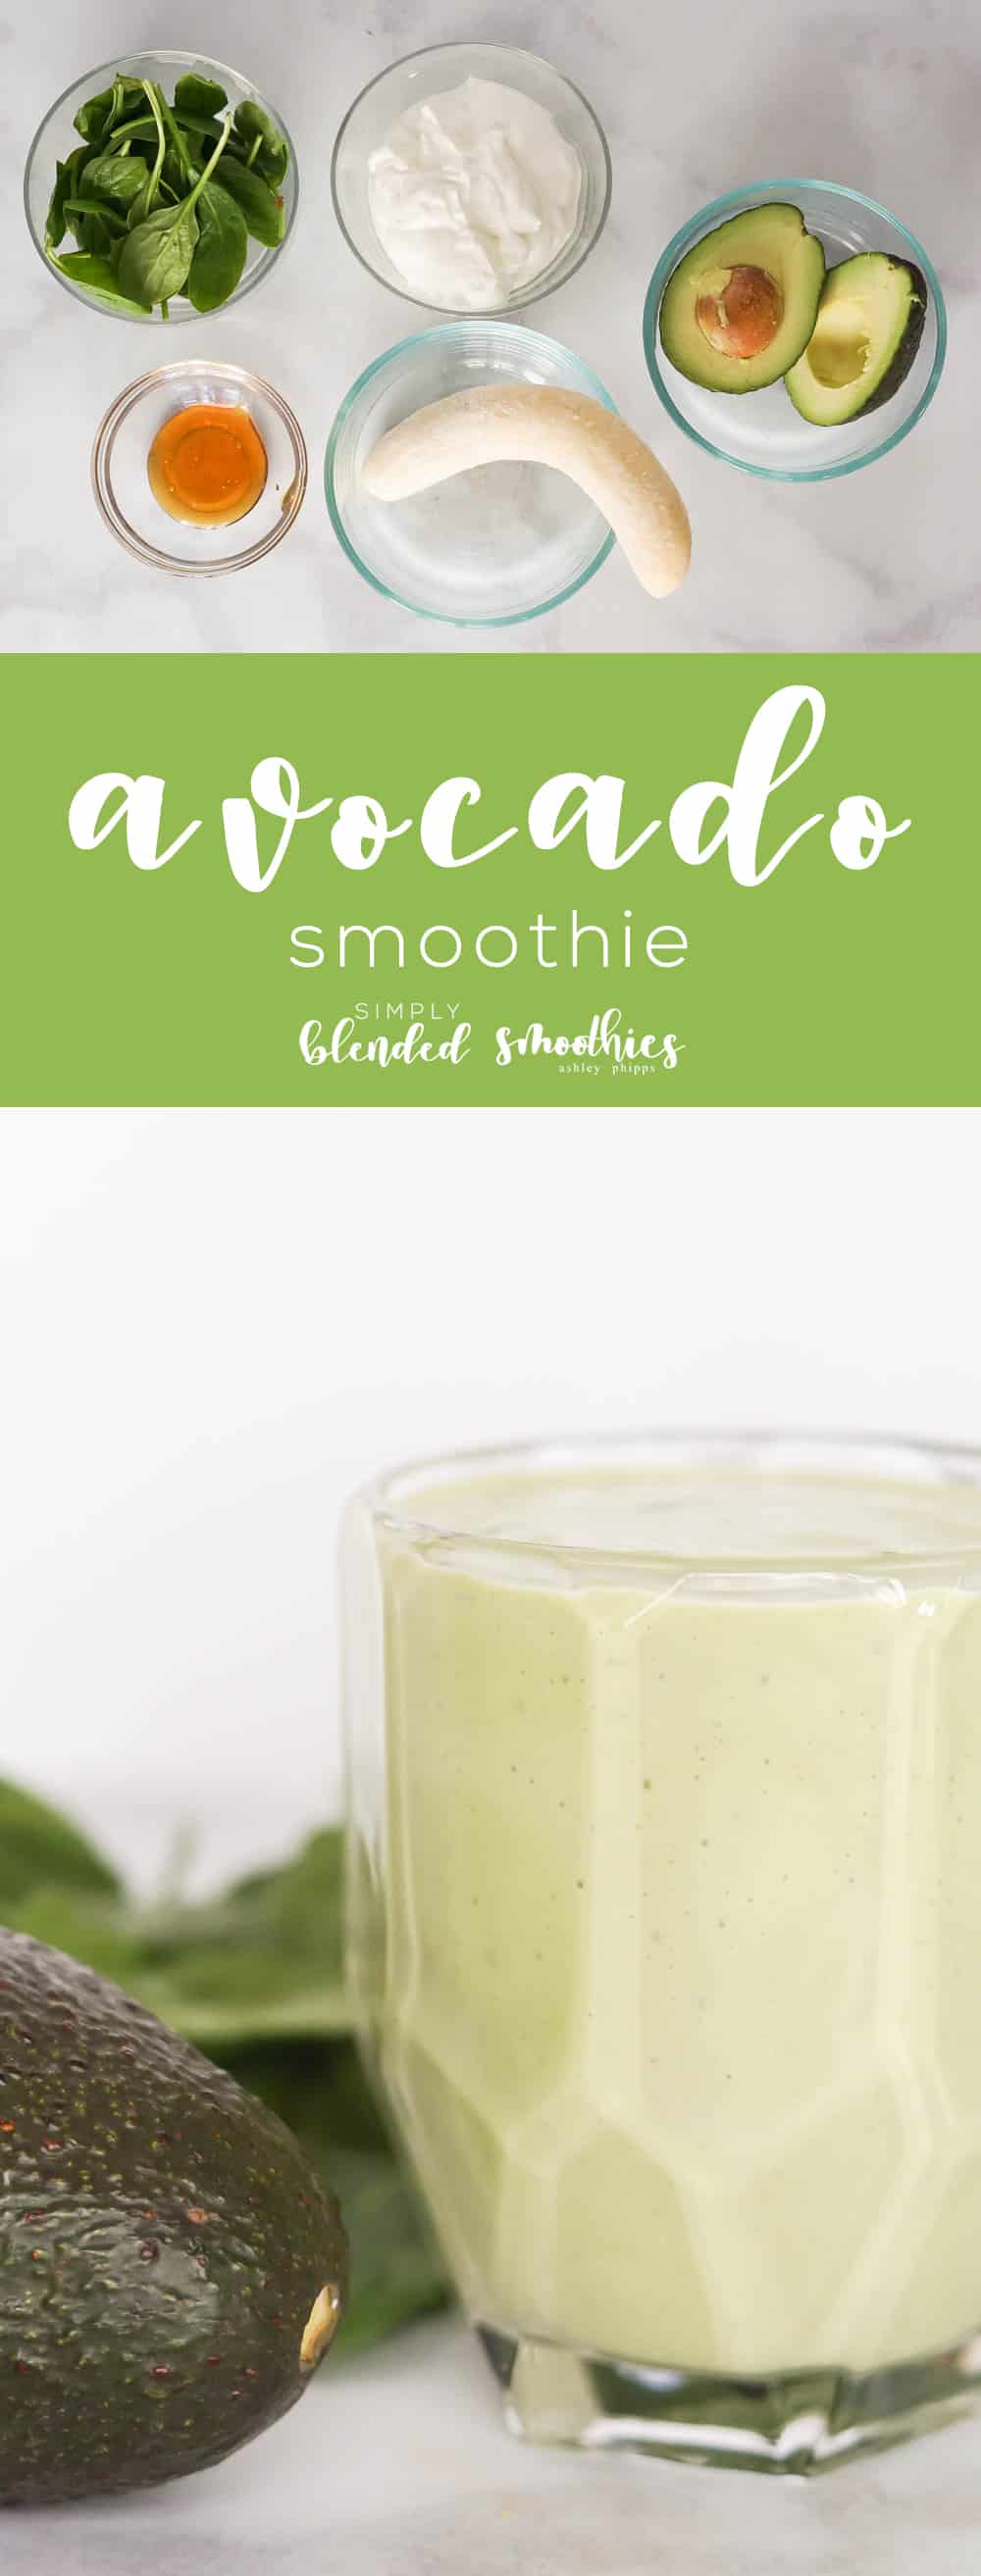 Avocado Smoothie - avocado smoothies are so rich and creamy and this one is full of healthy foods while tasting delicious